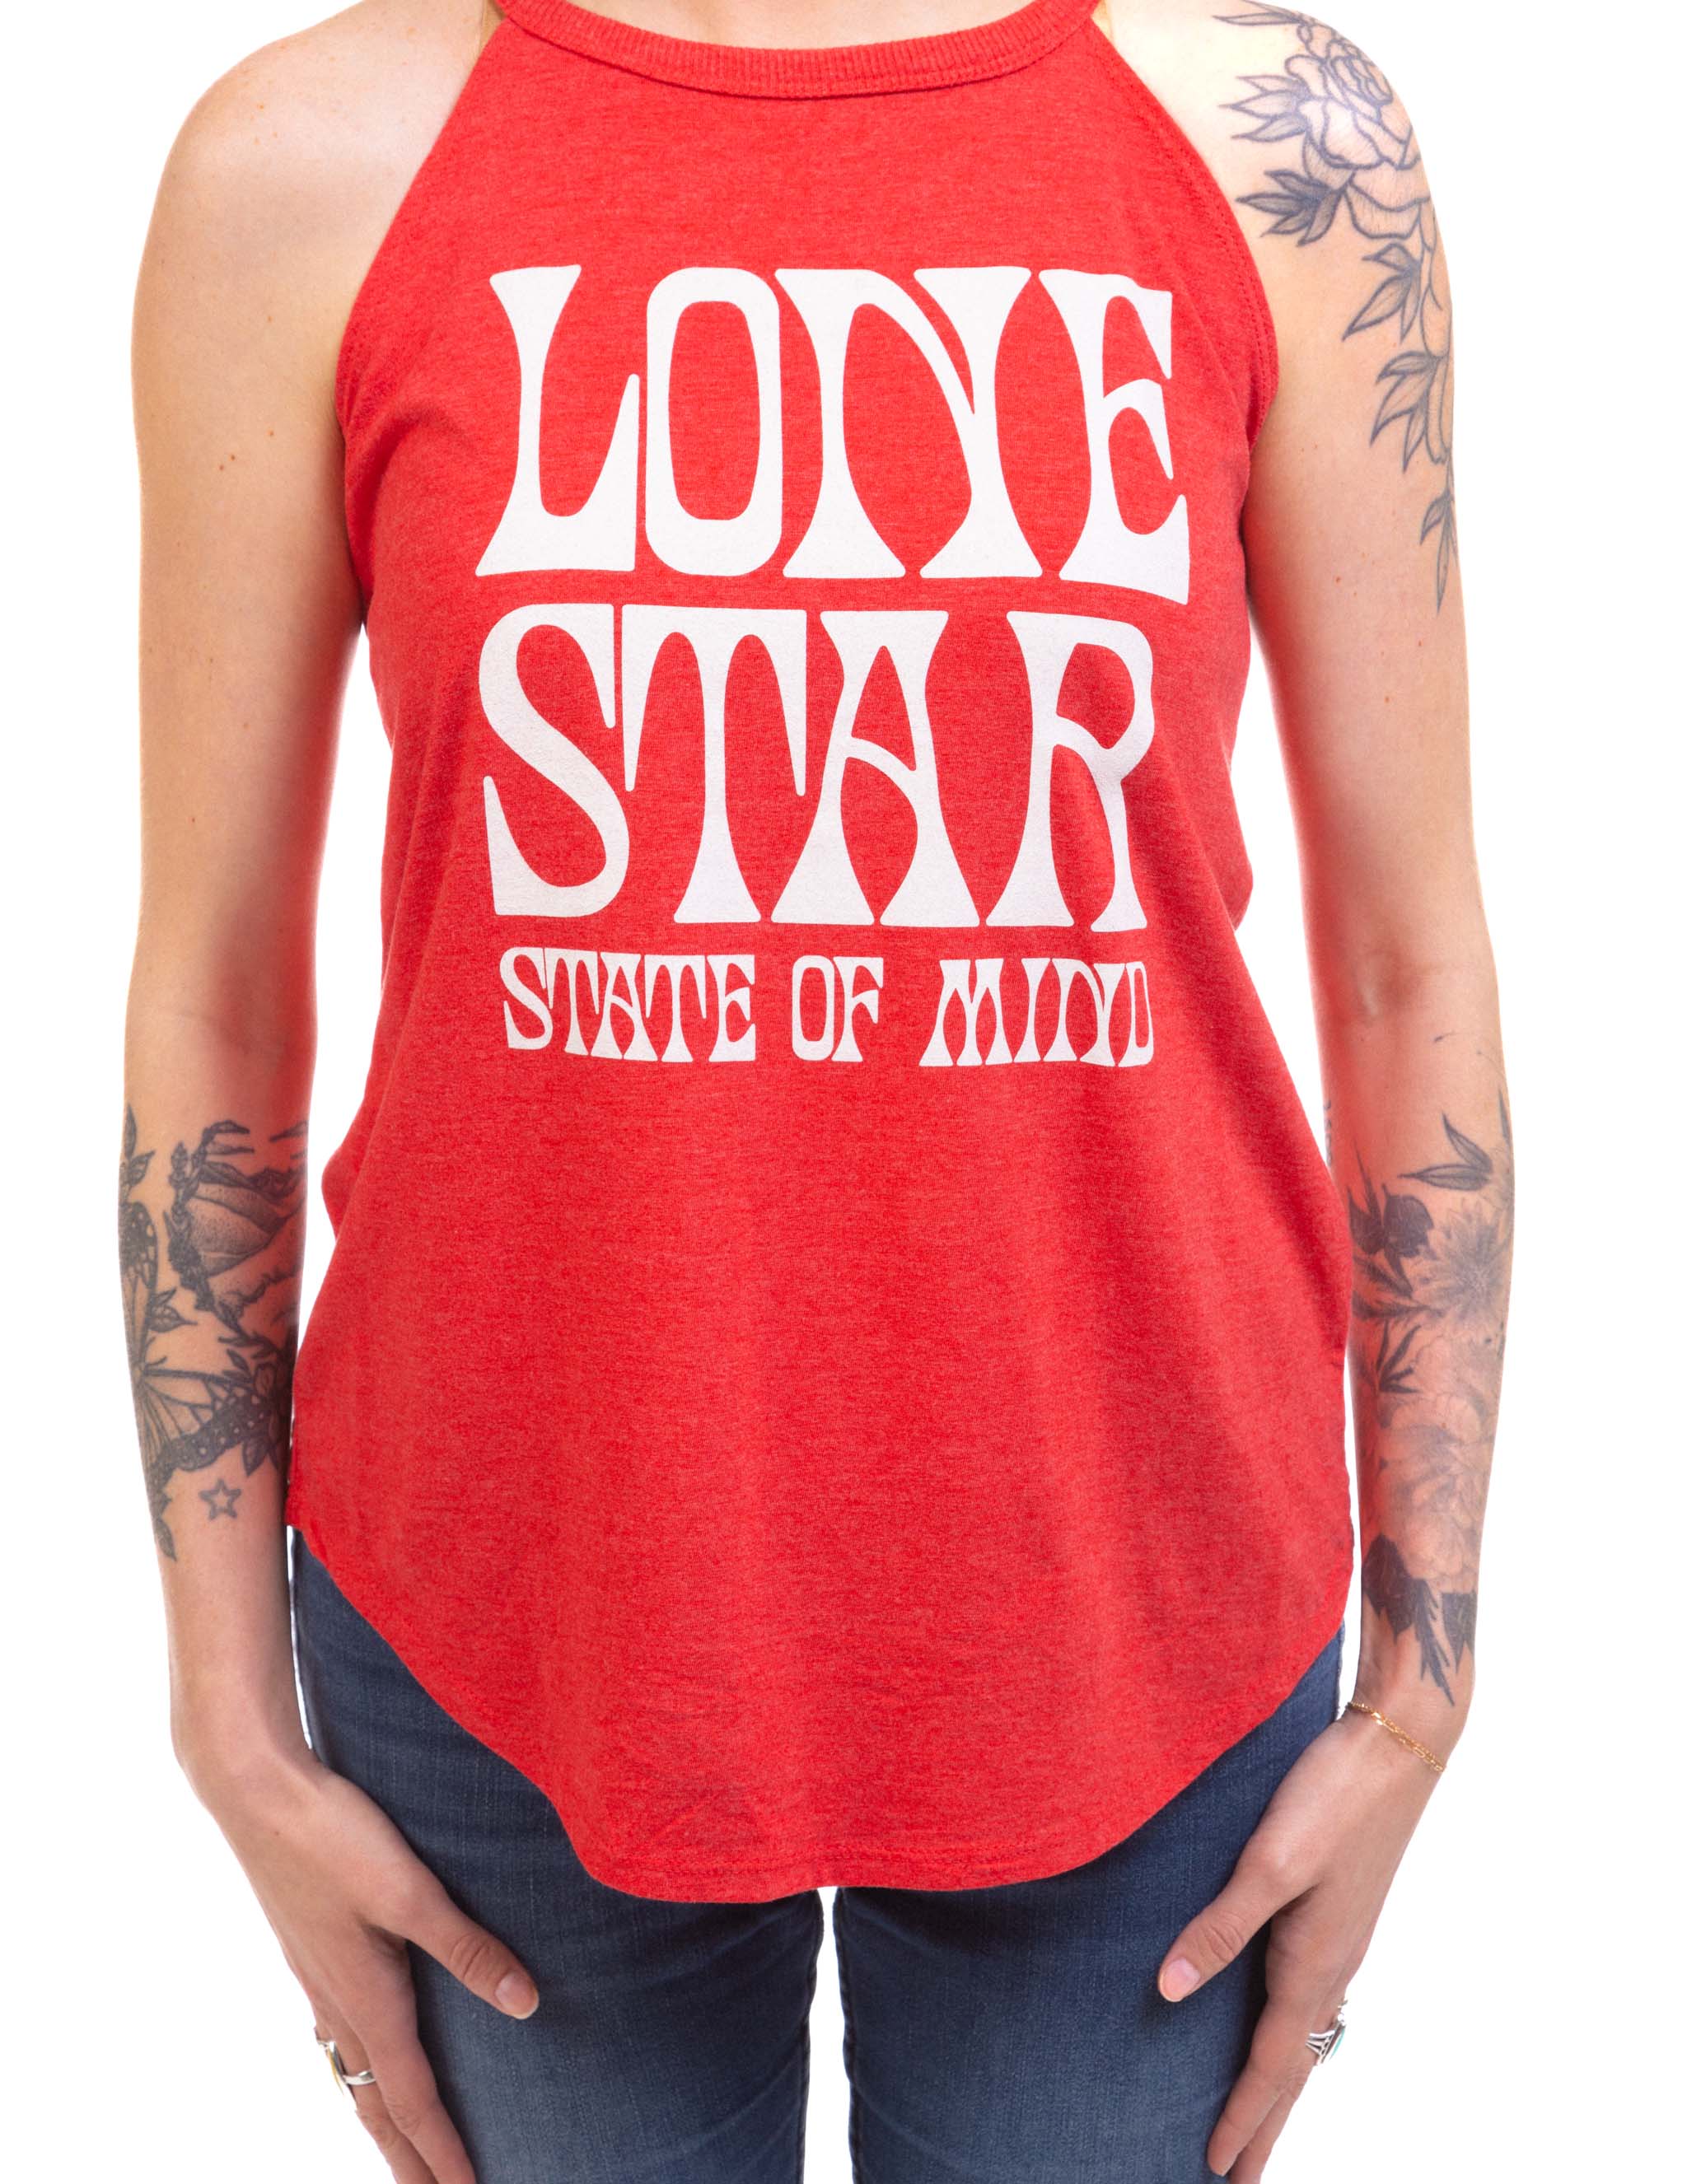 Texas Lone Star State of Mind Tank